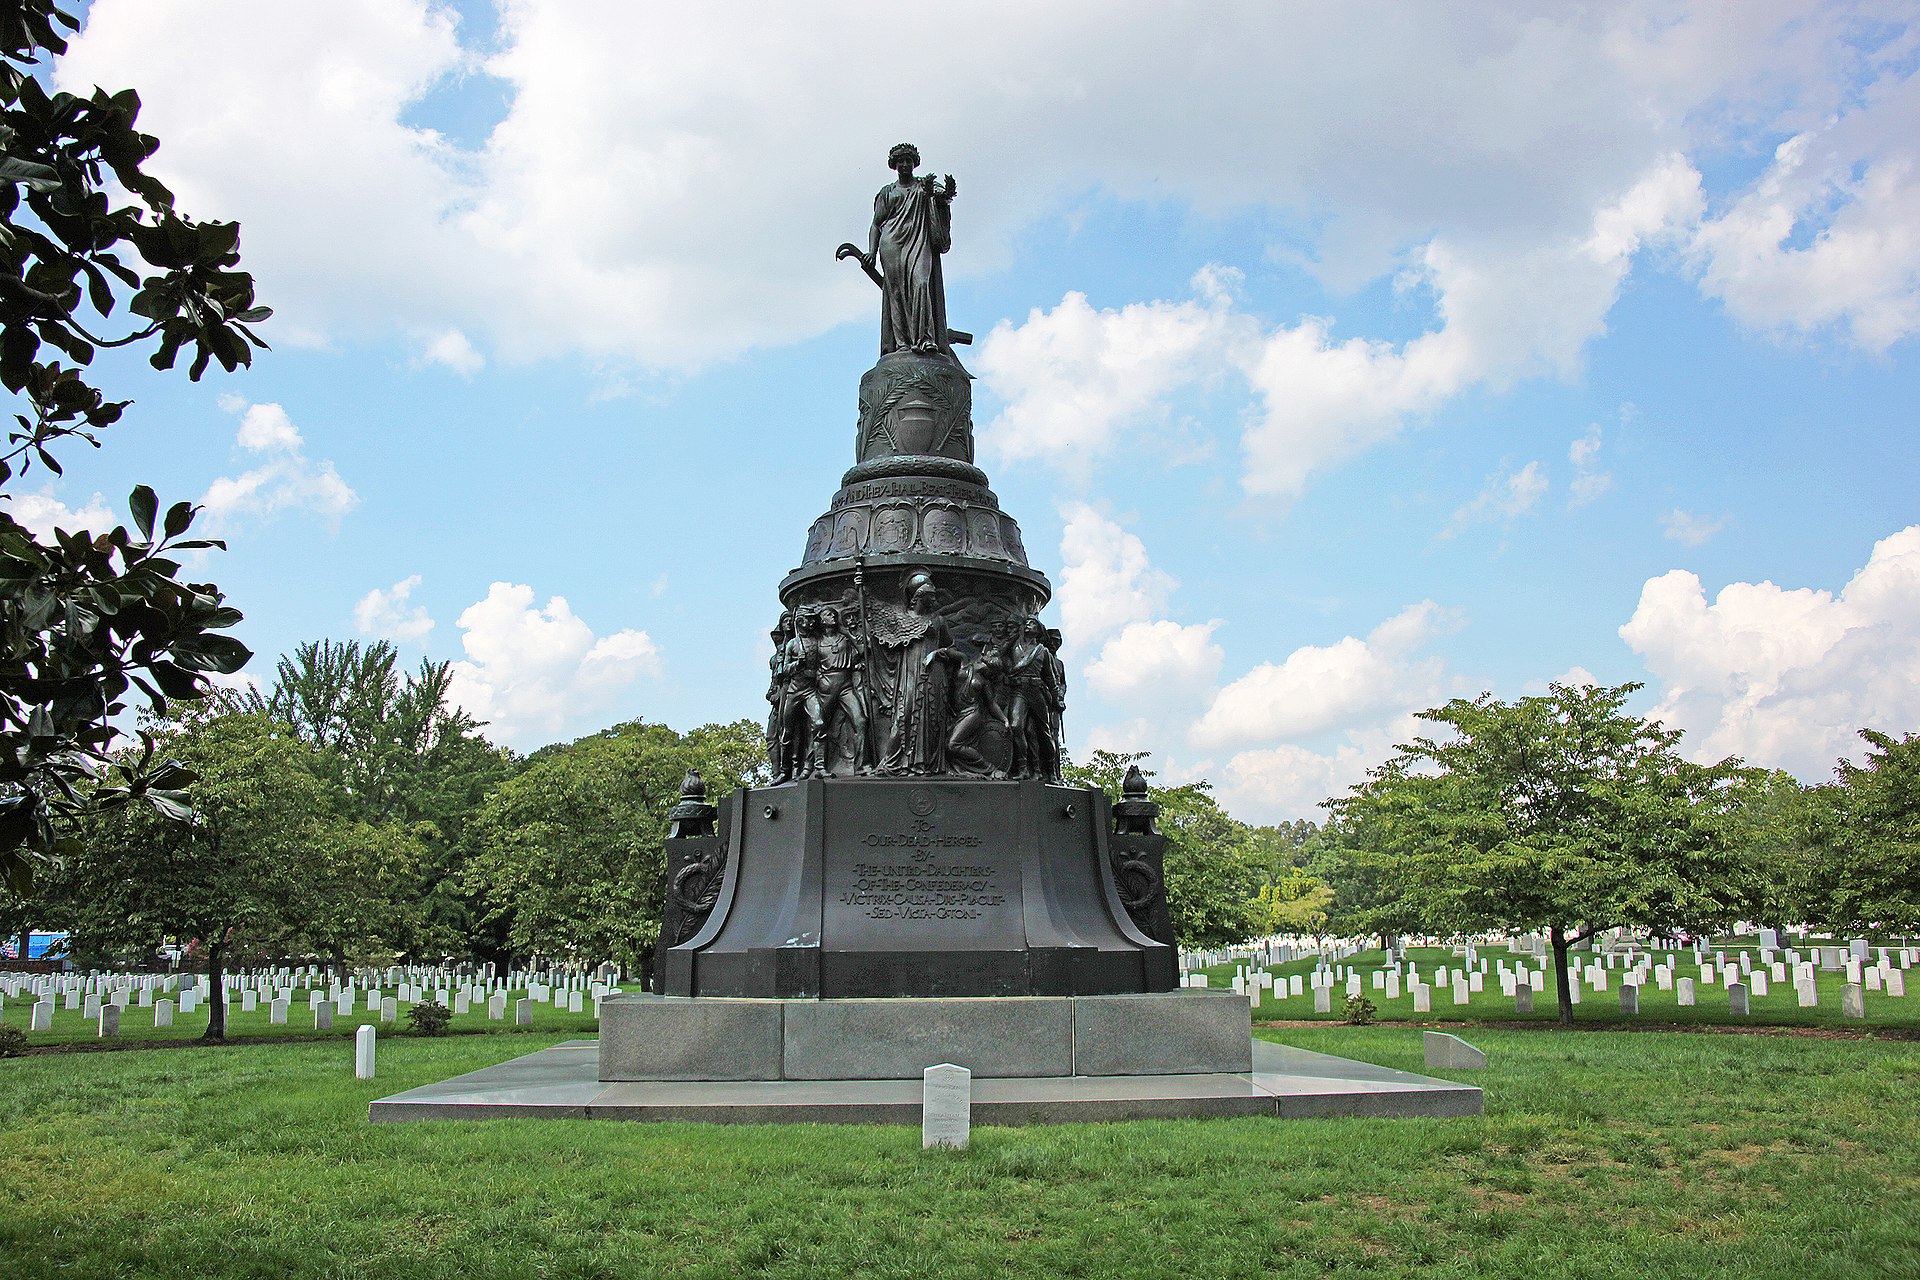 Frontal view of the Confederate monument at Arlington National Cemtery